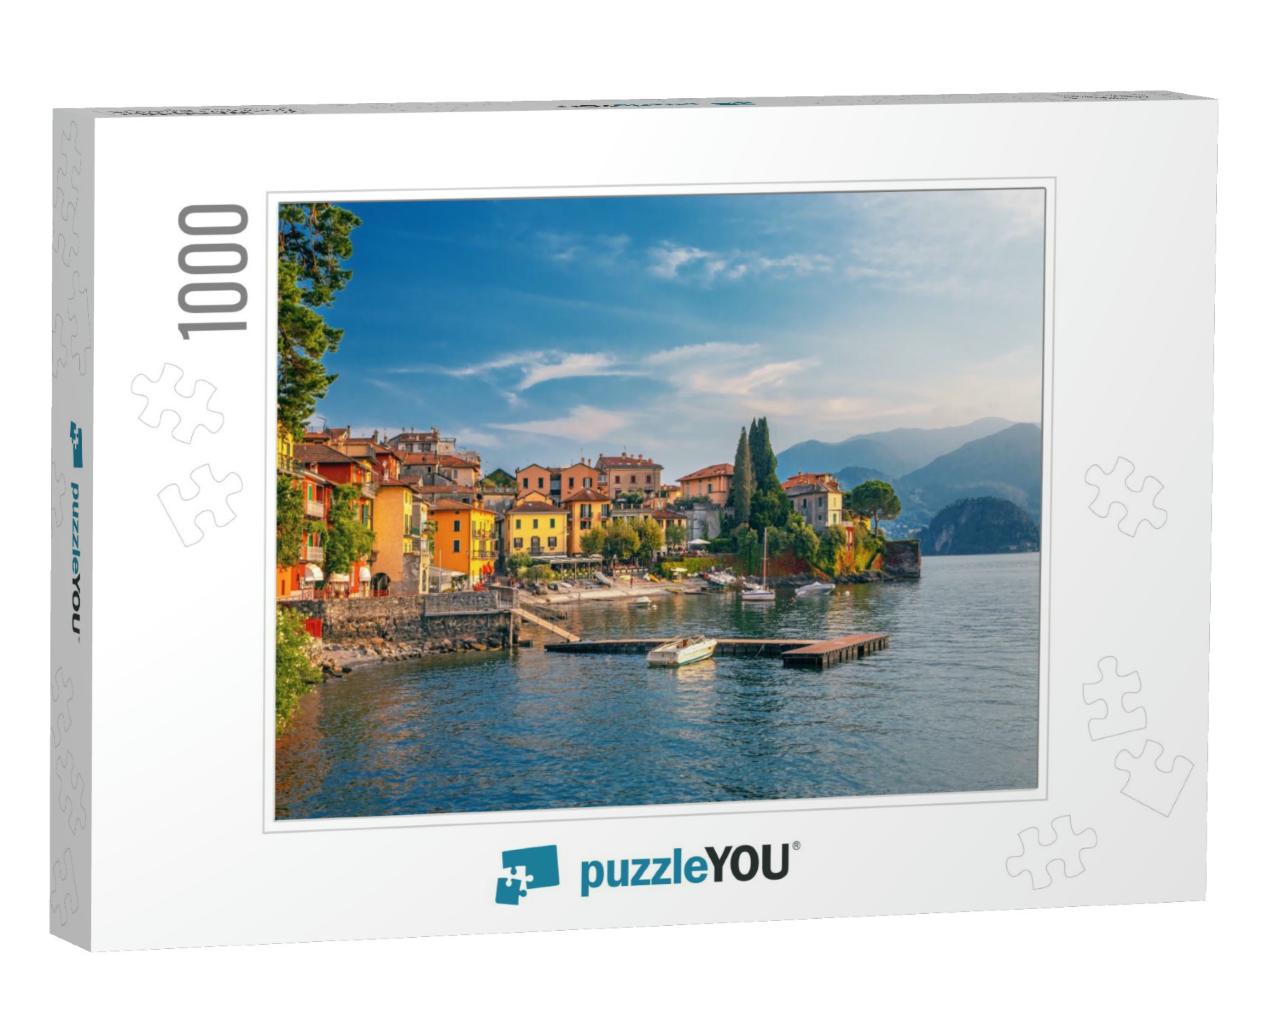 Varenna Scenic Sunset View in Como Lake, Italy... Jigsaw Puzzle with 1000 pieces